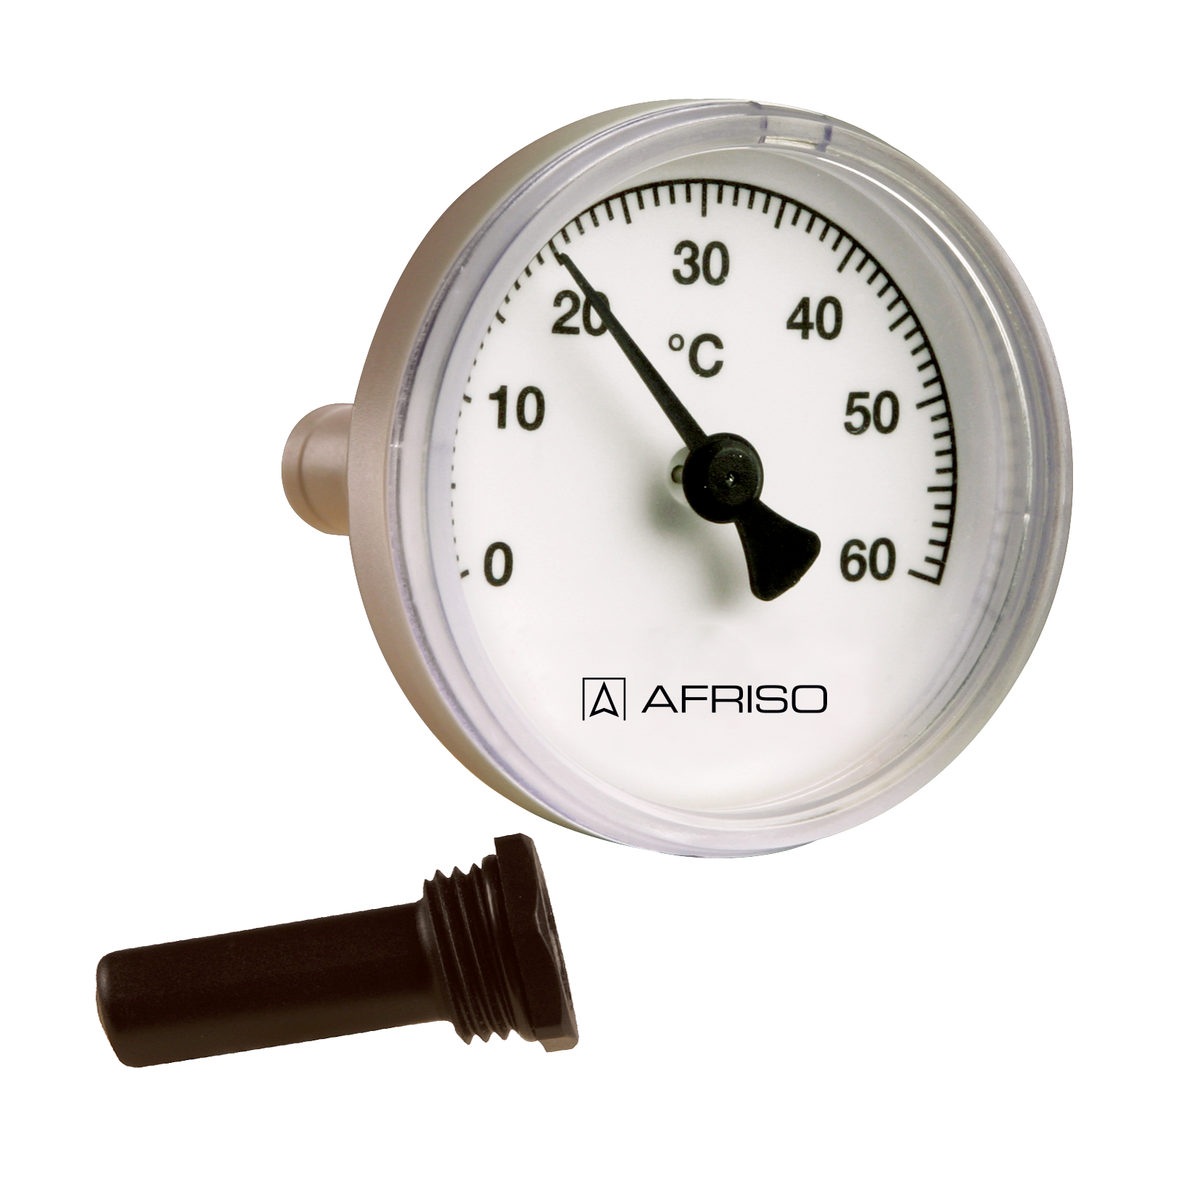 AFRISO Bimetall-Thermometer BiTh 50 K 0/60C 40mm 1/2 axial Kl.2 SAL 84920 object_image_57154_de